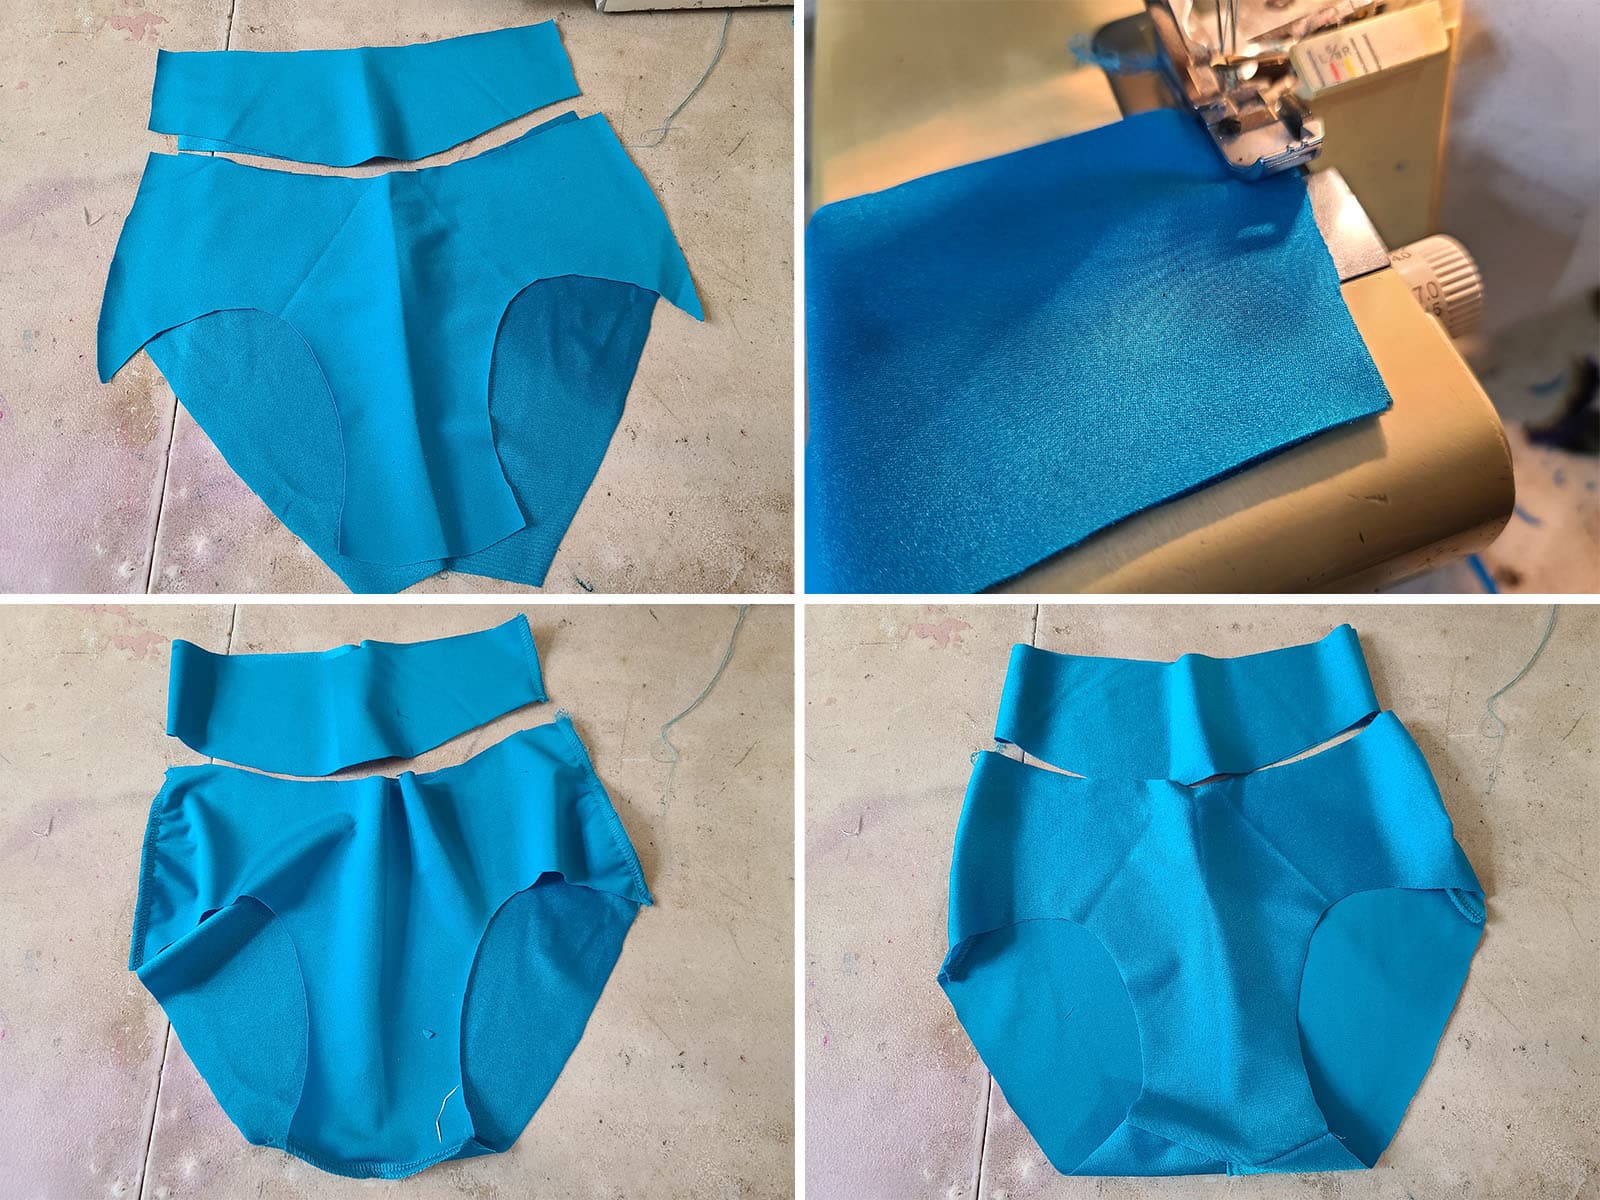 A 4 part image showing the briefs and yoke pieces being laid out and sewn together.